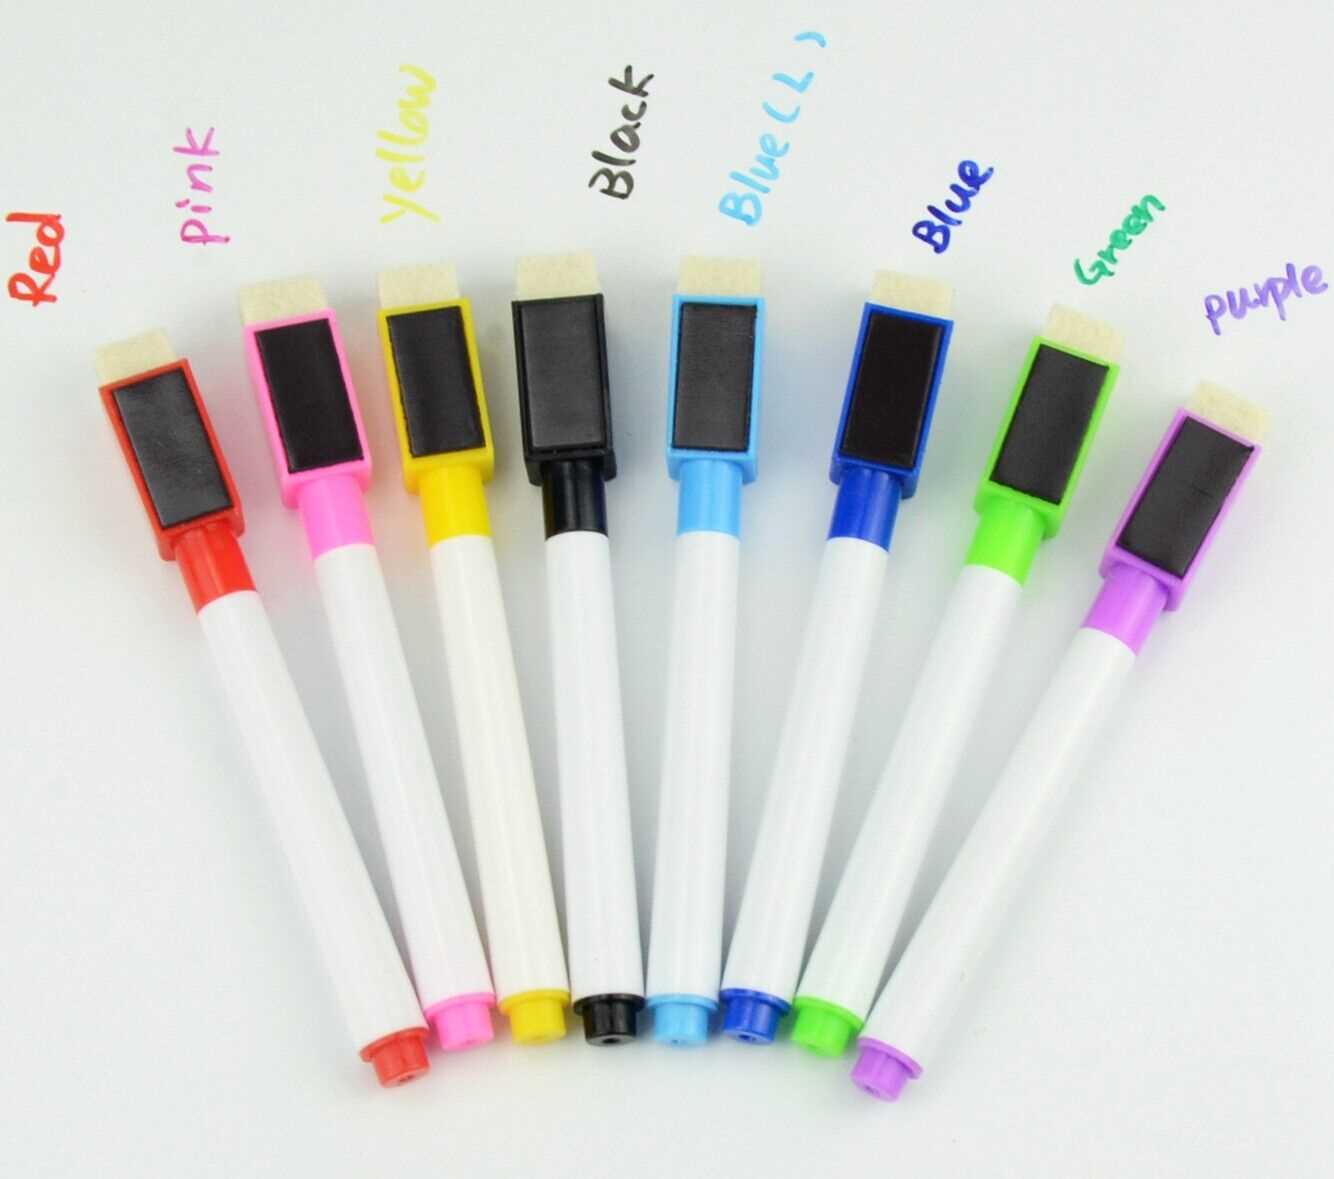 8 Colour Magnetic White Board Markers Pens Black Dry Eraser Easy Wipe Whiteboard